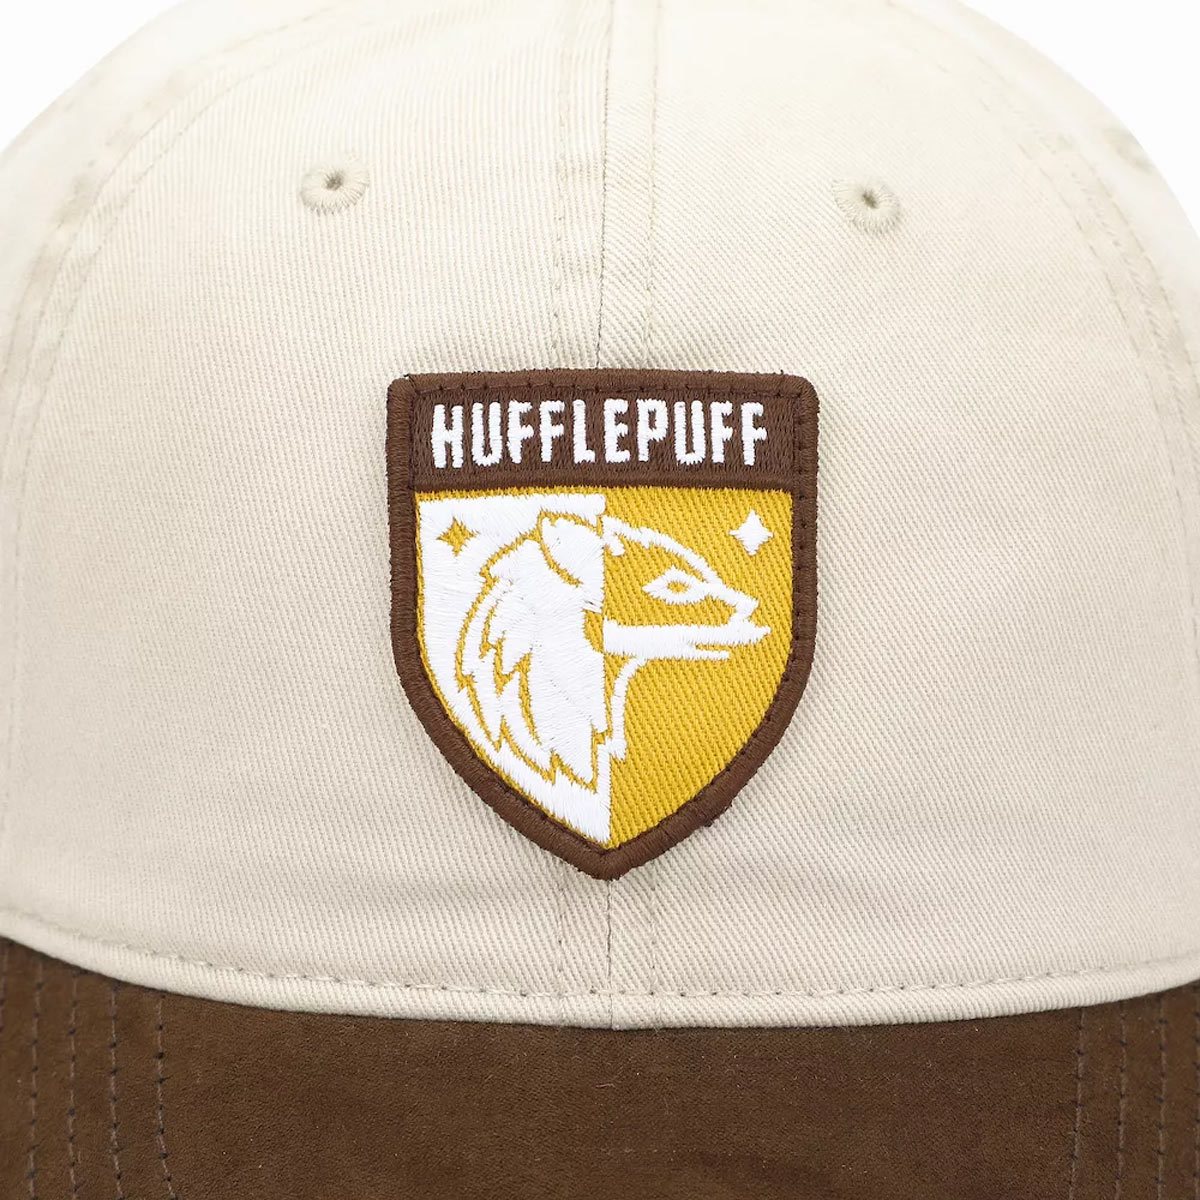 Harry Patch Potter Earth - Hat Entertainment Hufflepuff